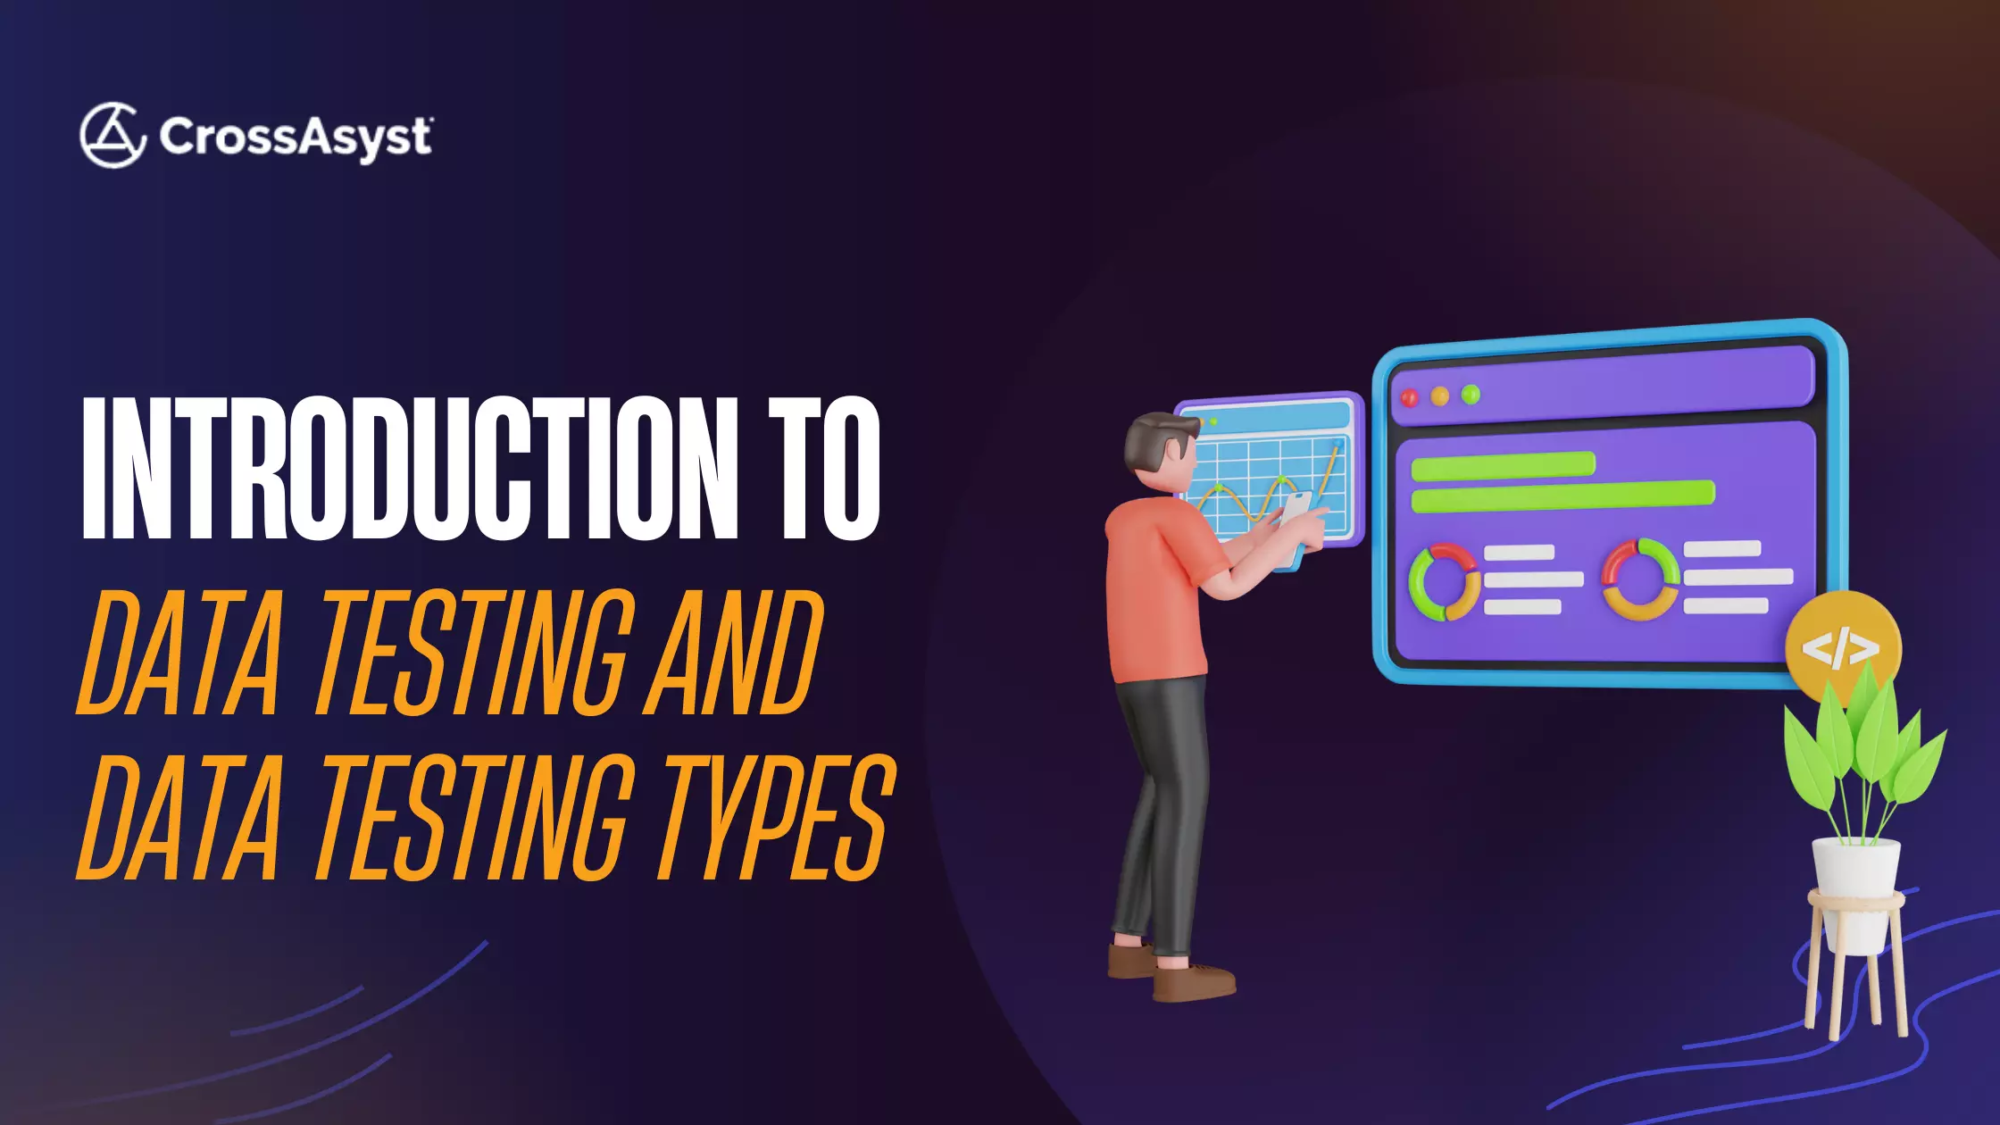 An Introduction to Data Testing and Data Testing Types